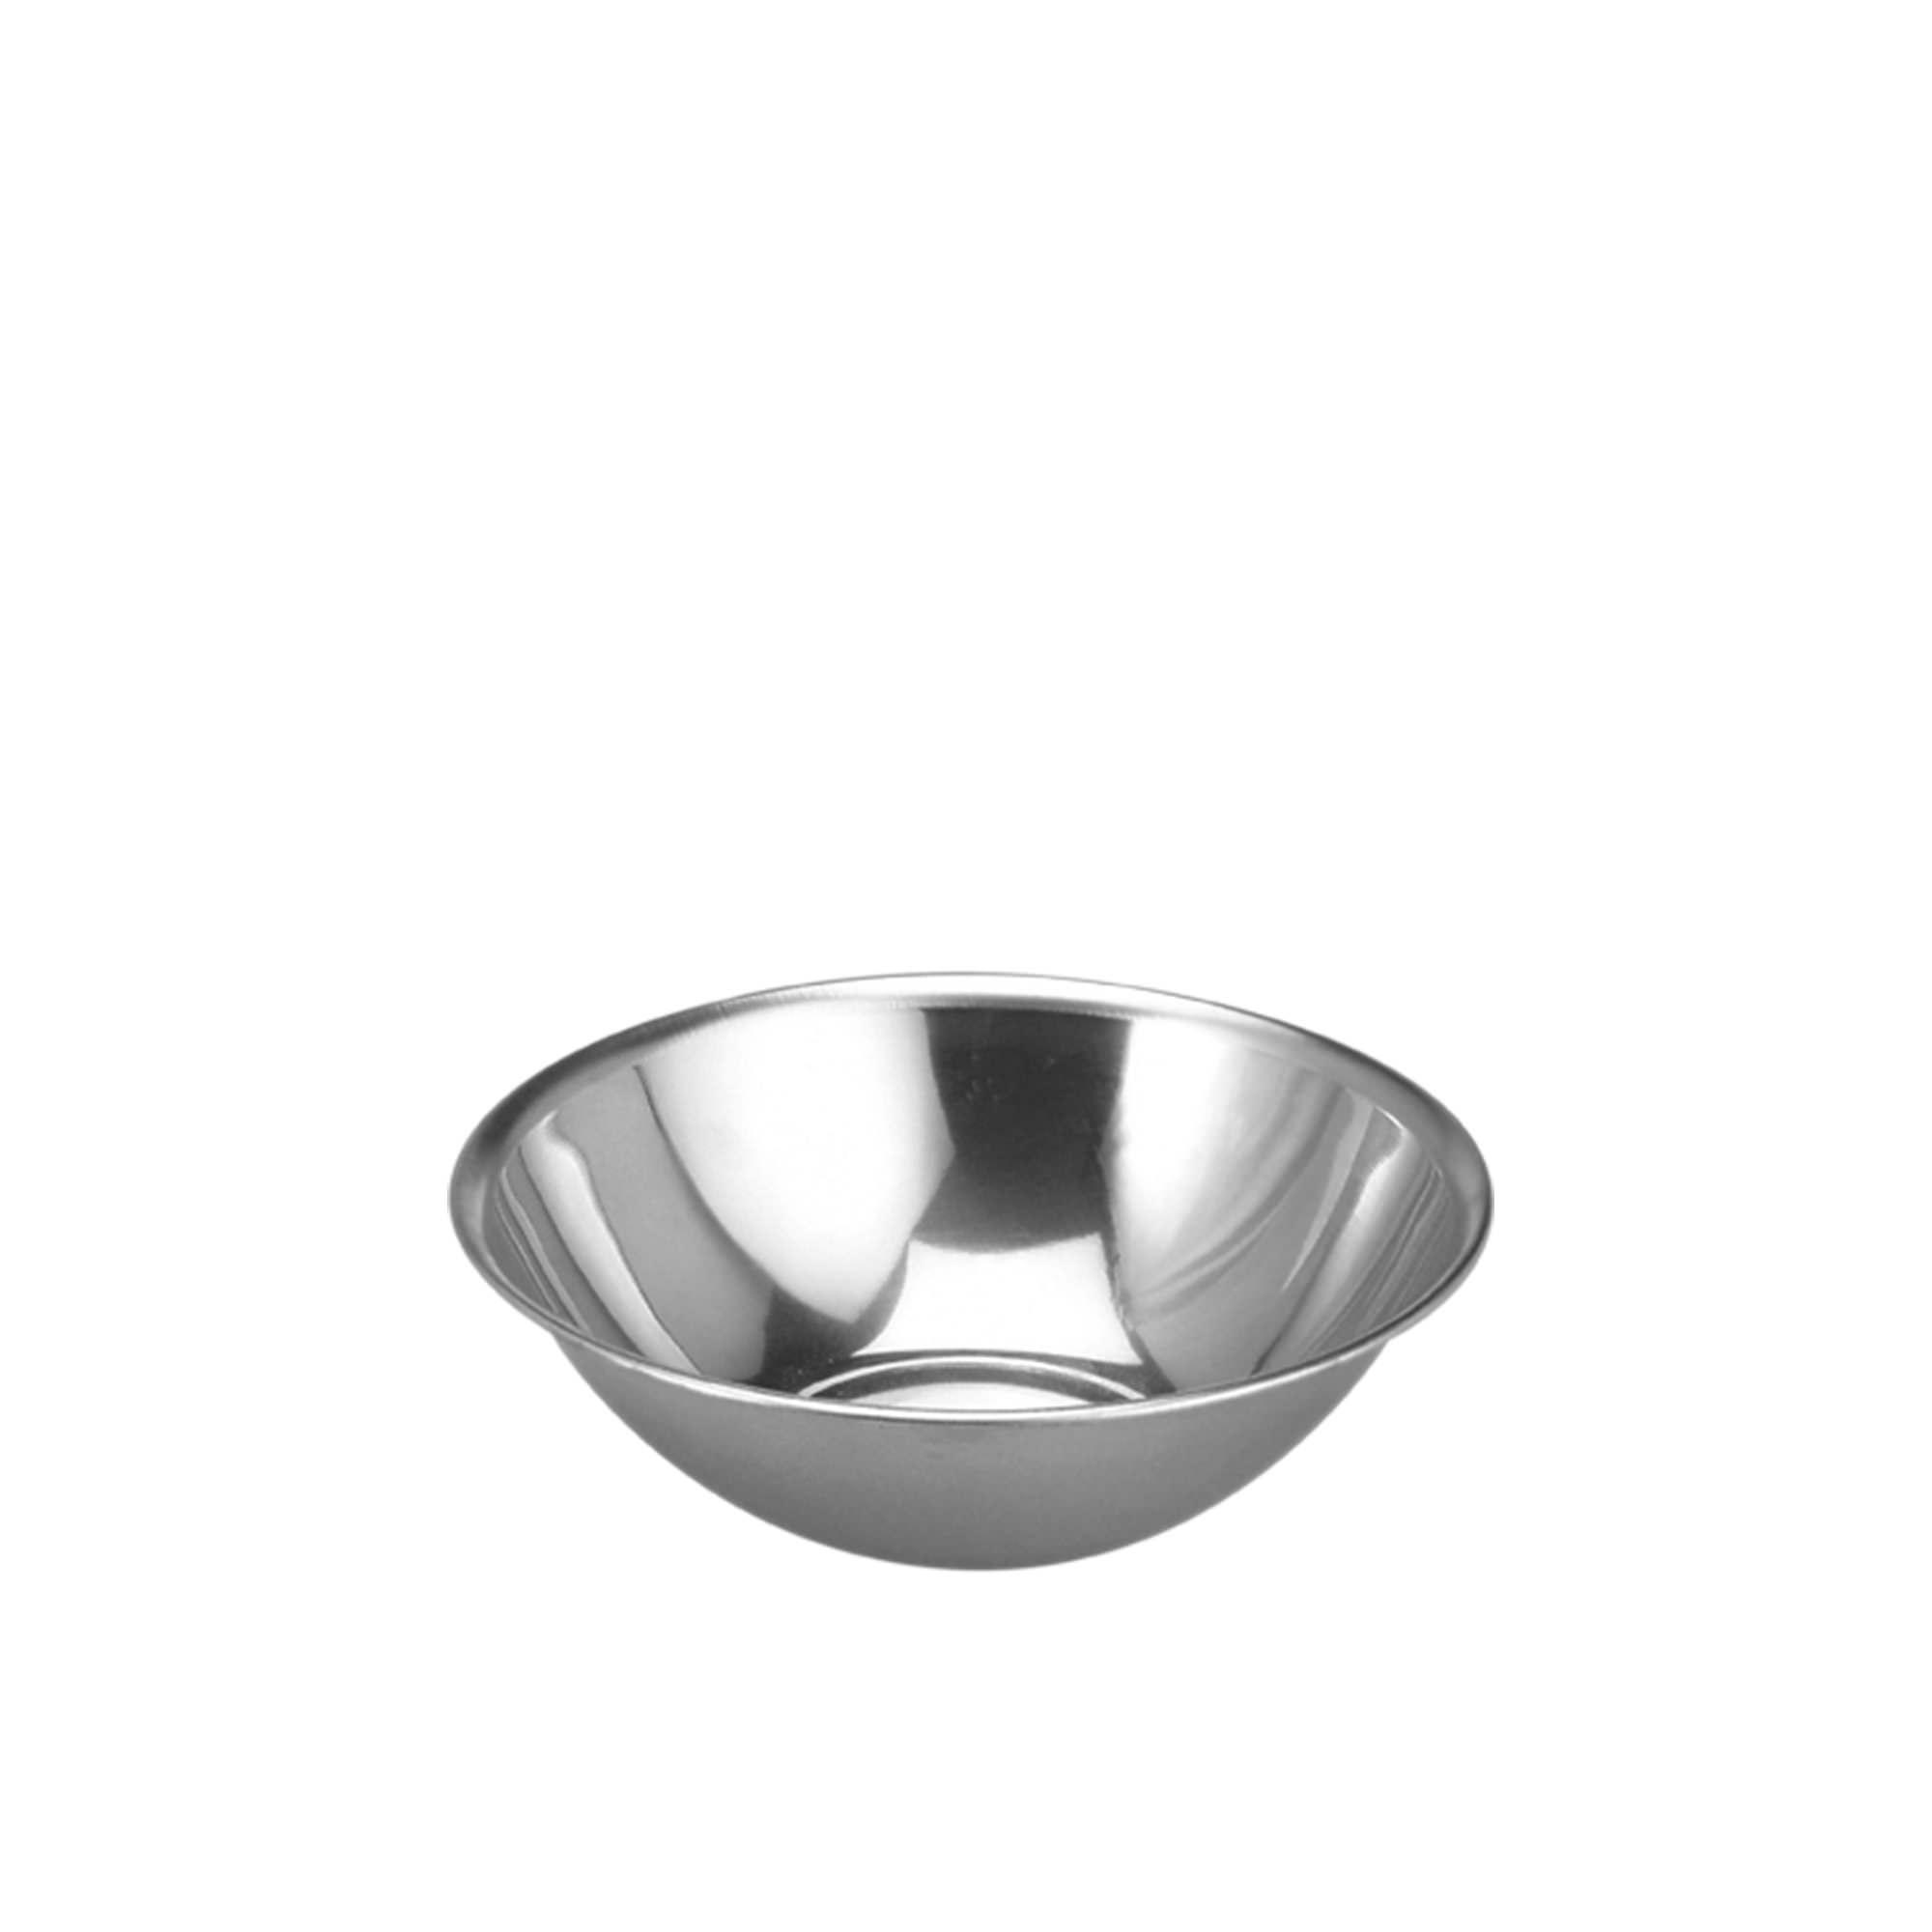 Chef Inox Stainless Steel Mixing Bowl 17cm - 600ml Image 1